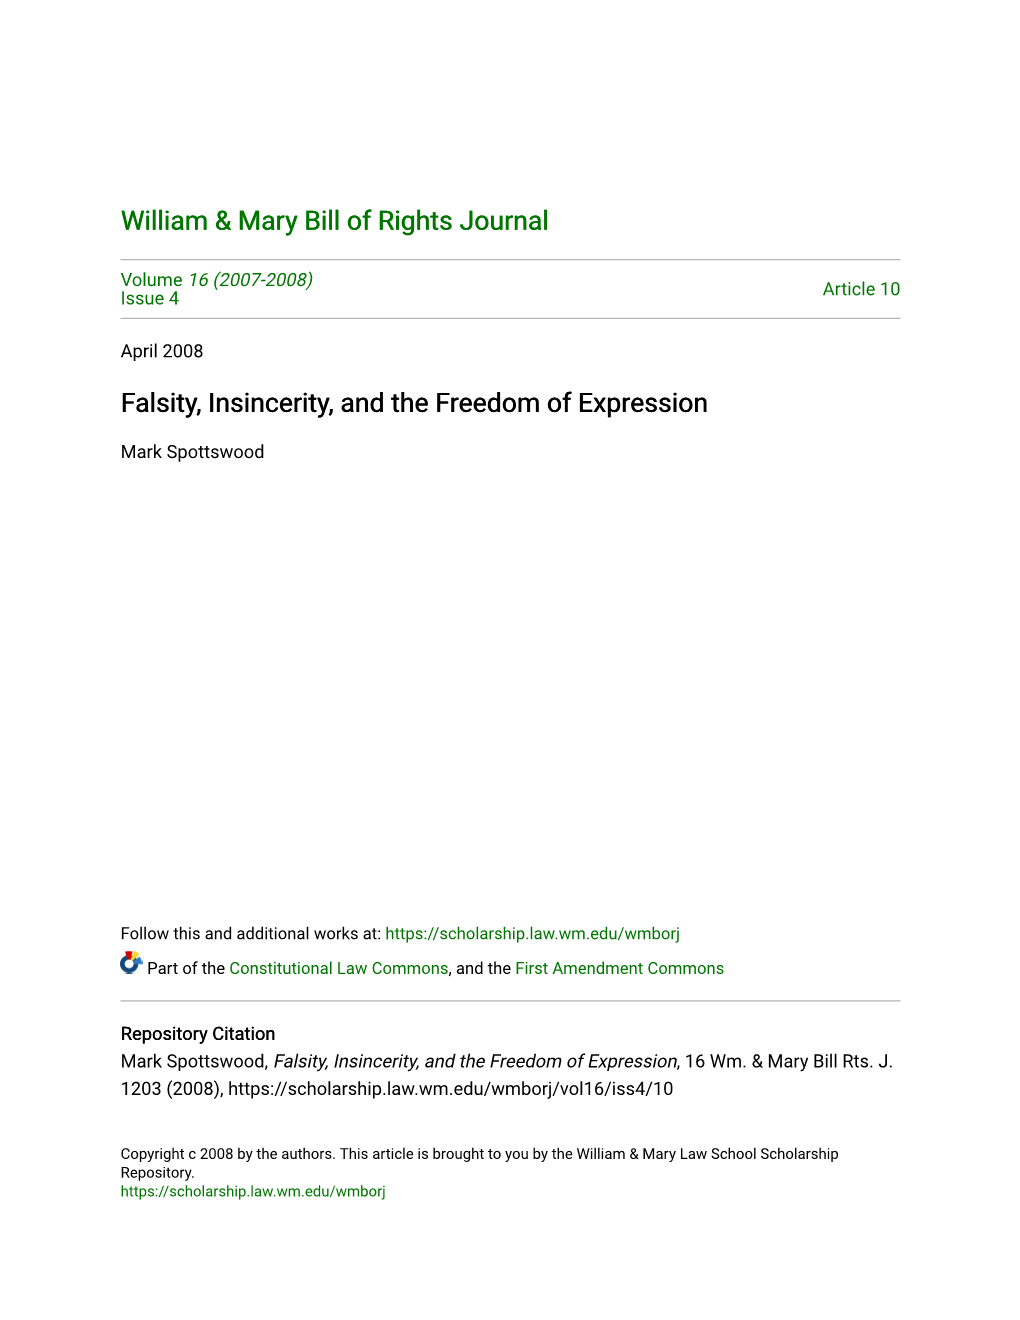 Falsity, Insincerity, and the Freedom of Expression